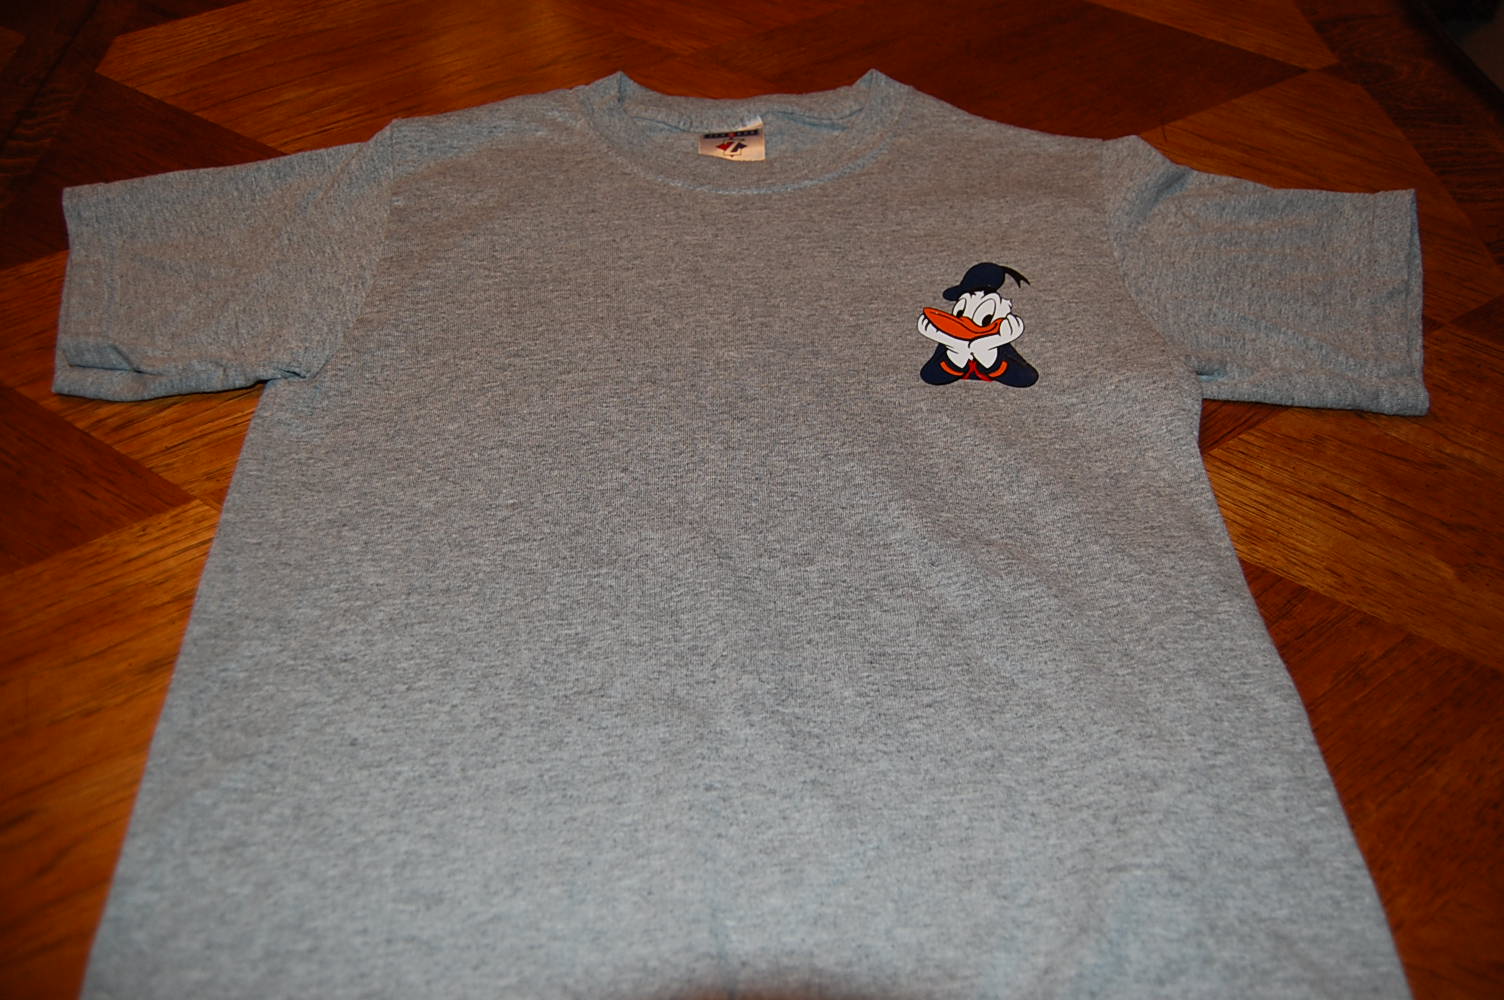 The Crafty Touch Disney Shirts Made With Heat Transfer Vinyl